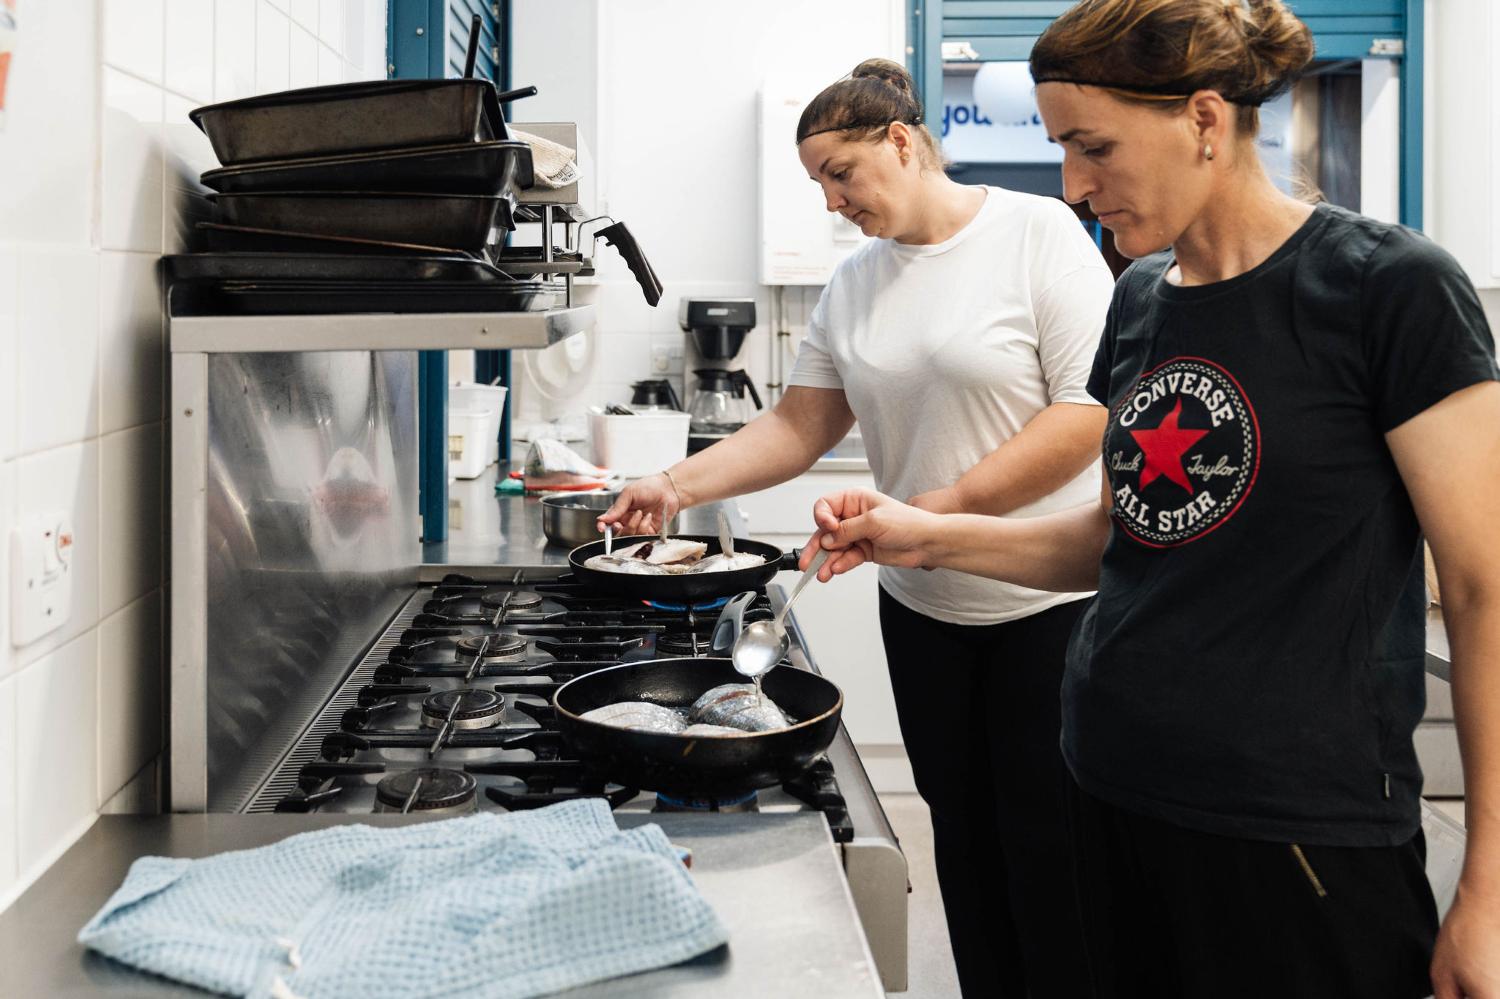 Two women cooking in a community kitchen